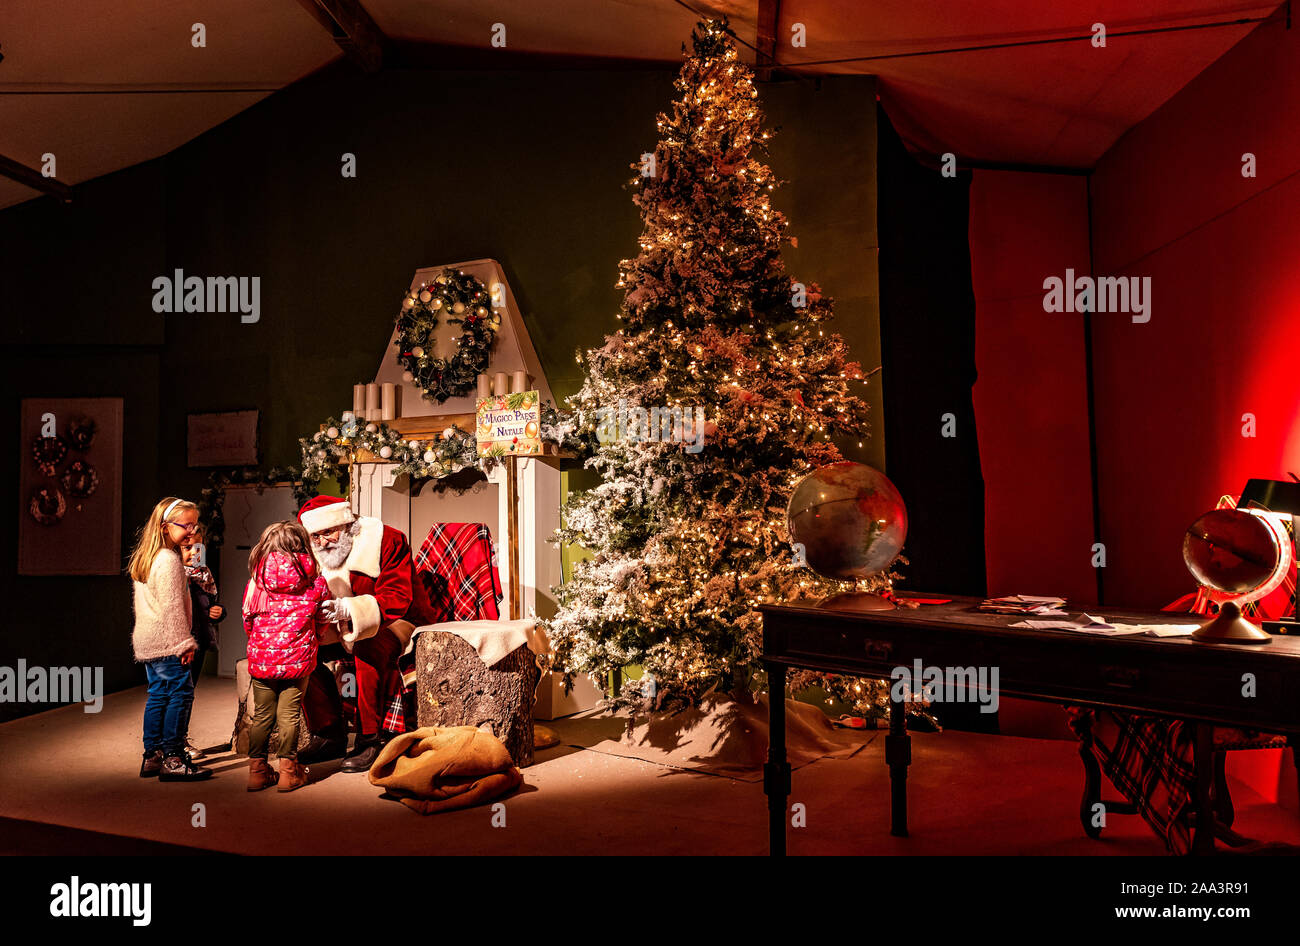 Paese Di Natale.Italy Piedmont Langhe Govone Il Magico Paese Di Natale The Magical Country Of Christmas Performances And Installations In The Home Of Santa Claus Santa Claus Stock Photo Alamy